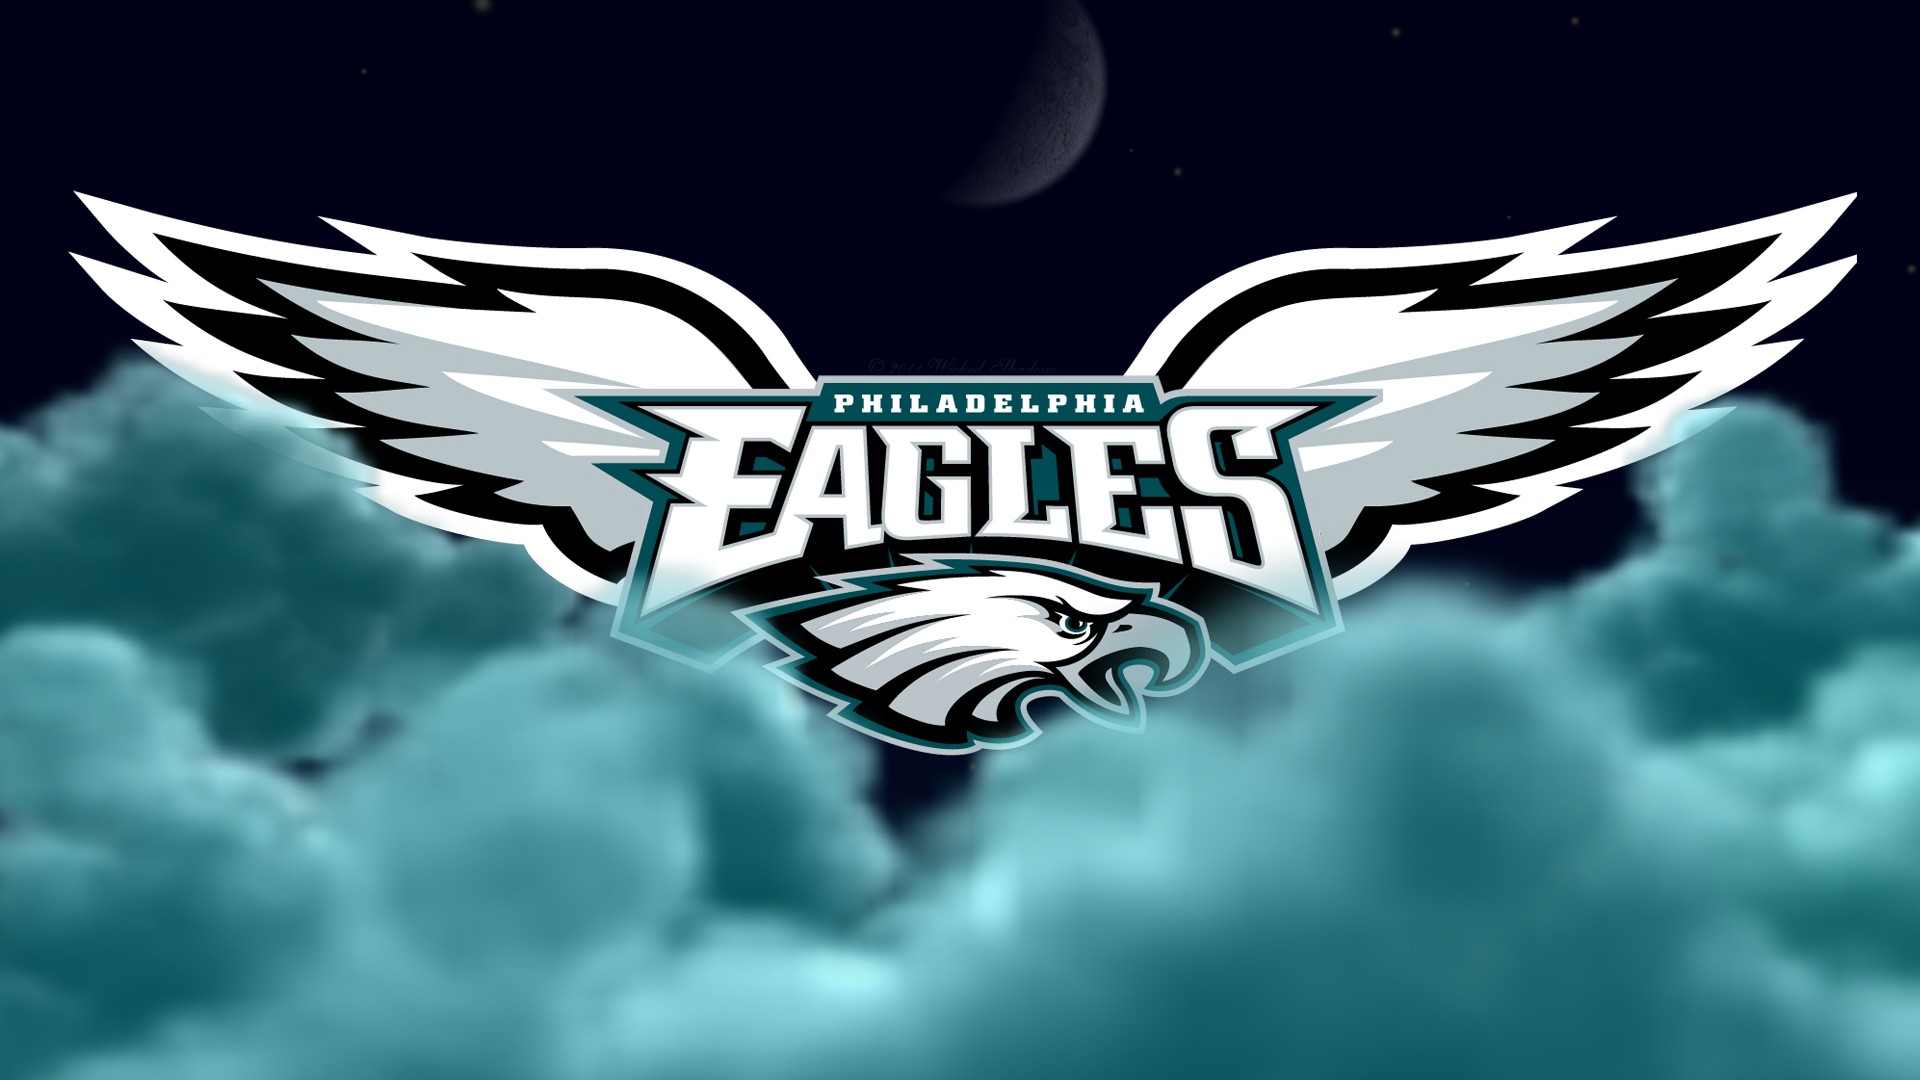 Philadelphia Eagles Hd Wallpapers With Resolution Pixel - Philadelphia Eagles Angel Wings - HD Wallpaper 